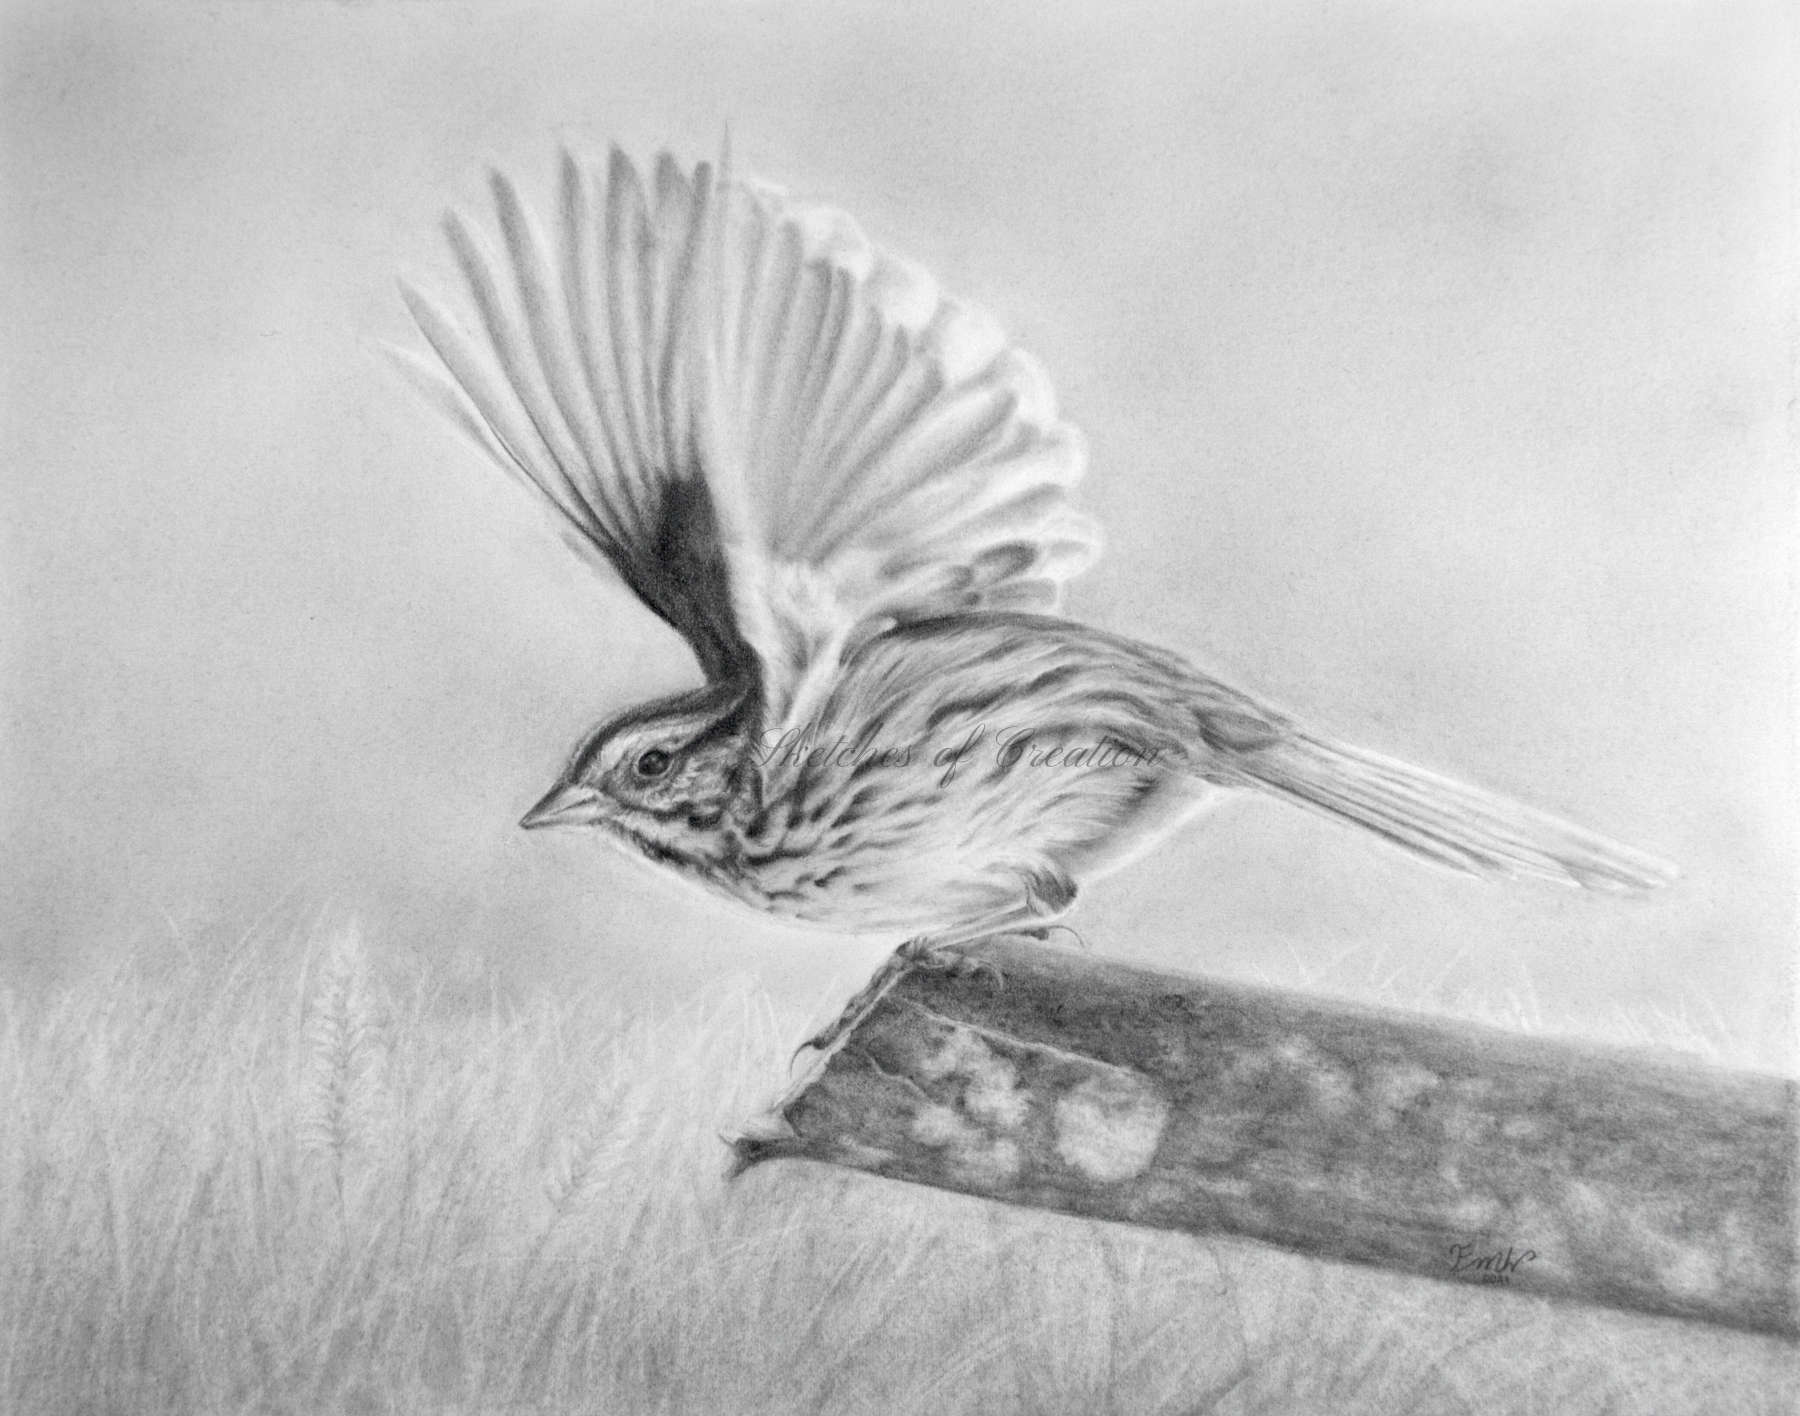 'Takeoff' a drawing of a Song Sparrow. approximately 8x10 inches plus deckled edge. Completed May 2021